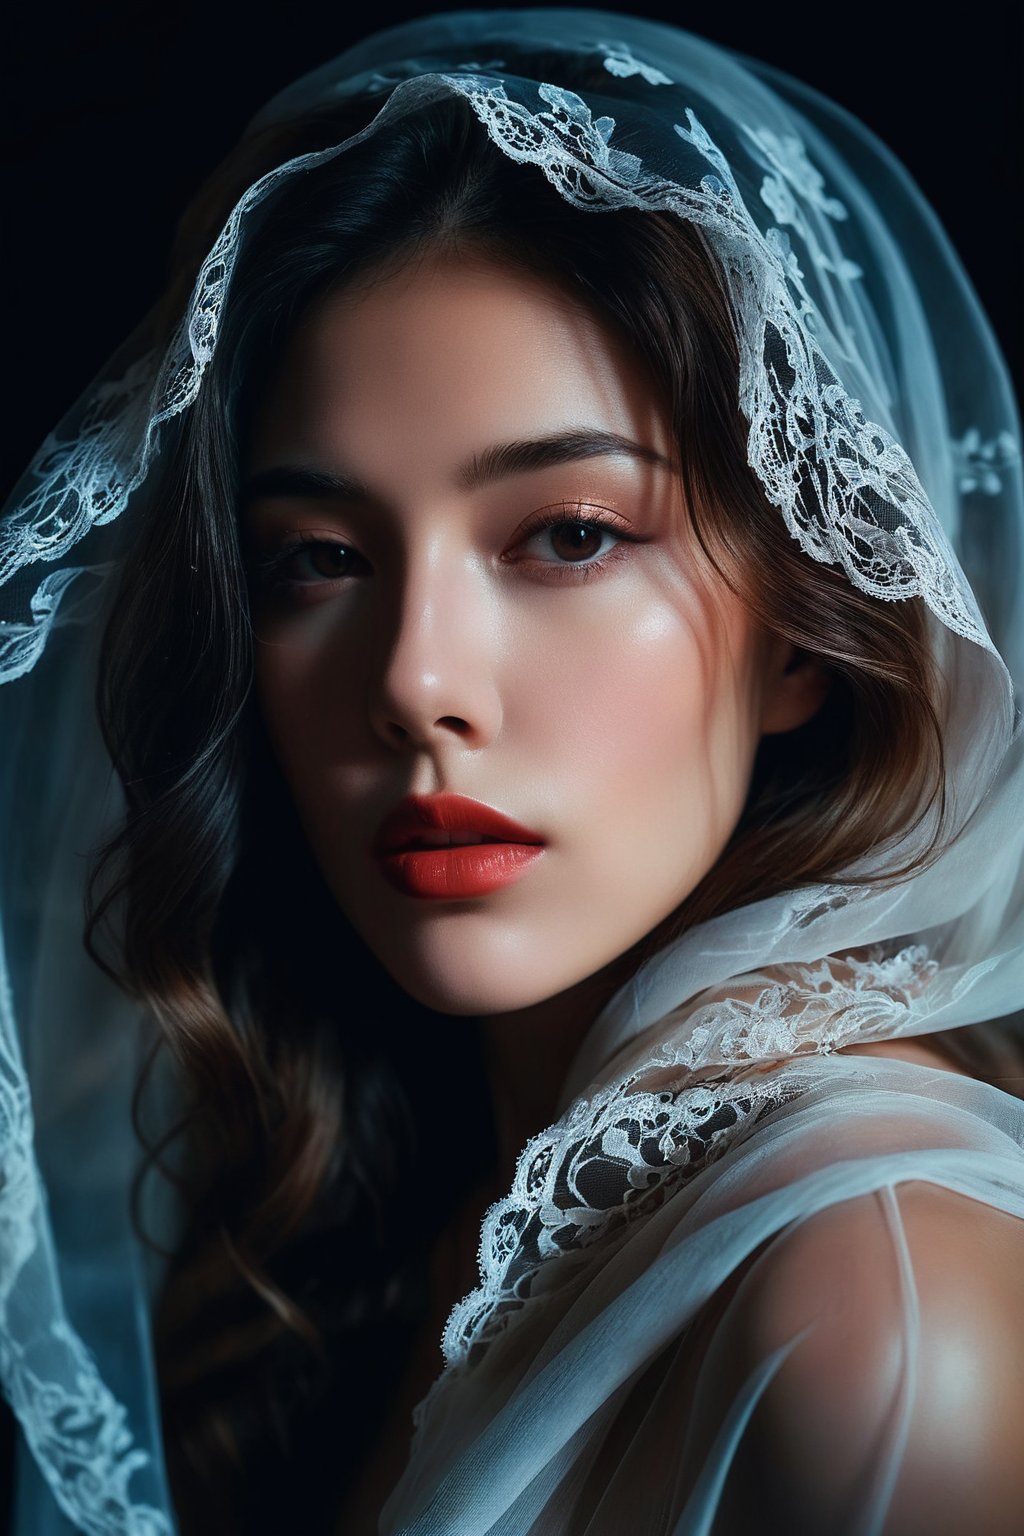 (ultra realistic,best quality),photorealistic,Extremely Realistic, in depth, cinematic light,hubggirl,

1girl, splash detailed, surreal dramatic lighting shadow (lofi, analog), kodak film by Brandon Woelfel Ryan McGinley, moment eyes, beautiful face, 
Minimalistic black background with a woman's face partially obscured in the style of flowing fabric, creating an enigmatic and mysterious atmosphere. The dark tones accentuate the dramatic effect of her lips and hair against the stark contrast between lightness and darkness in the composition. This design is perfect for conveying a sense of mystery or depth. The ultra realistic photography style accentuates the dramatic effectThis stunning image is rendered in insanely high resolution, 

intricate background, realism,realistic,raw,analog,portrait,photorealistic,